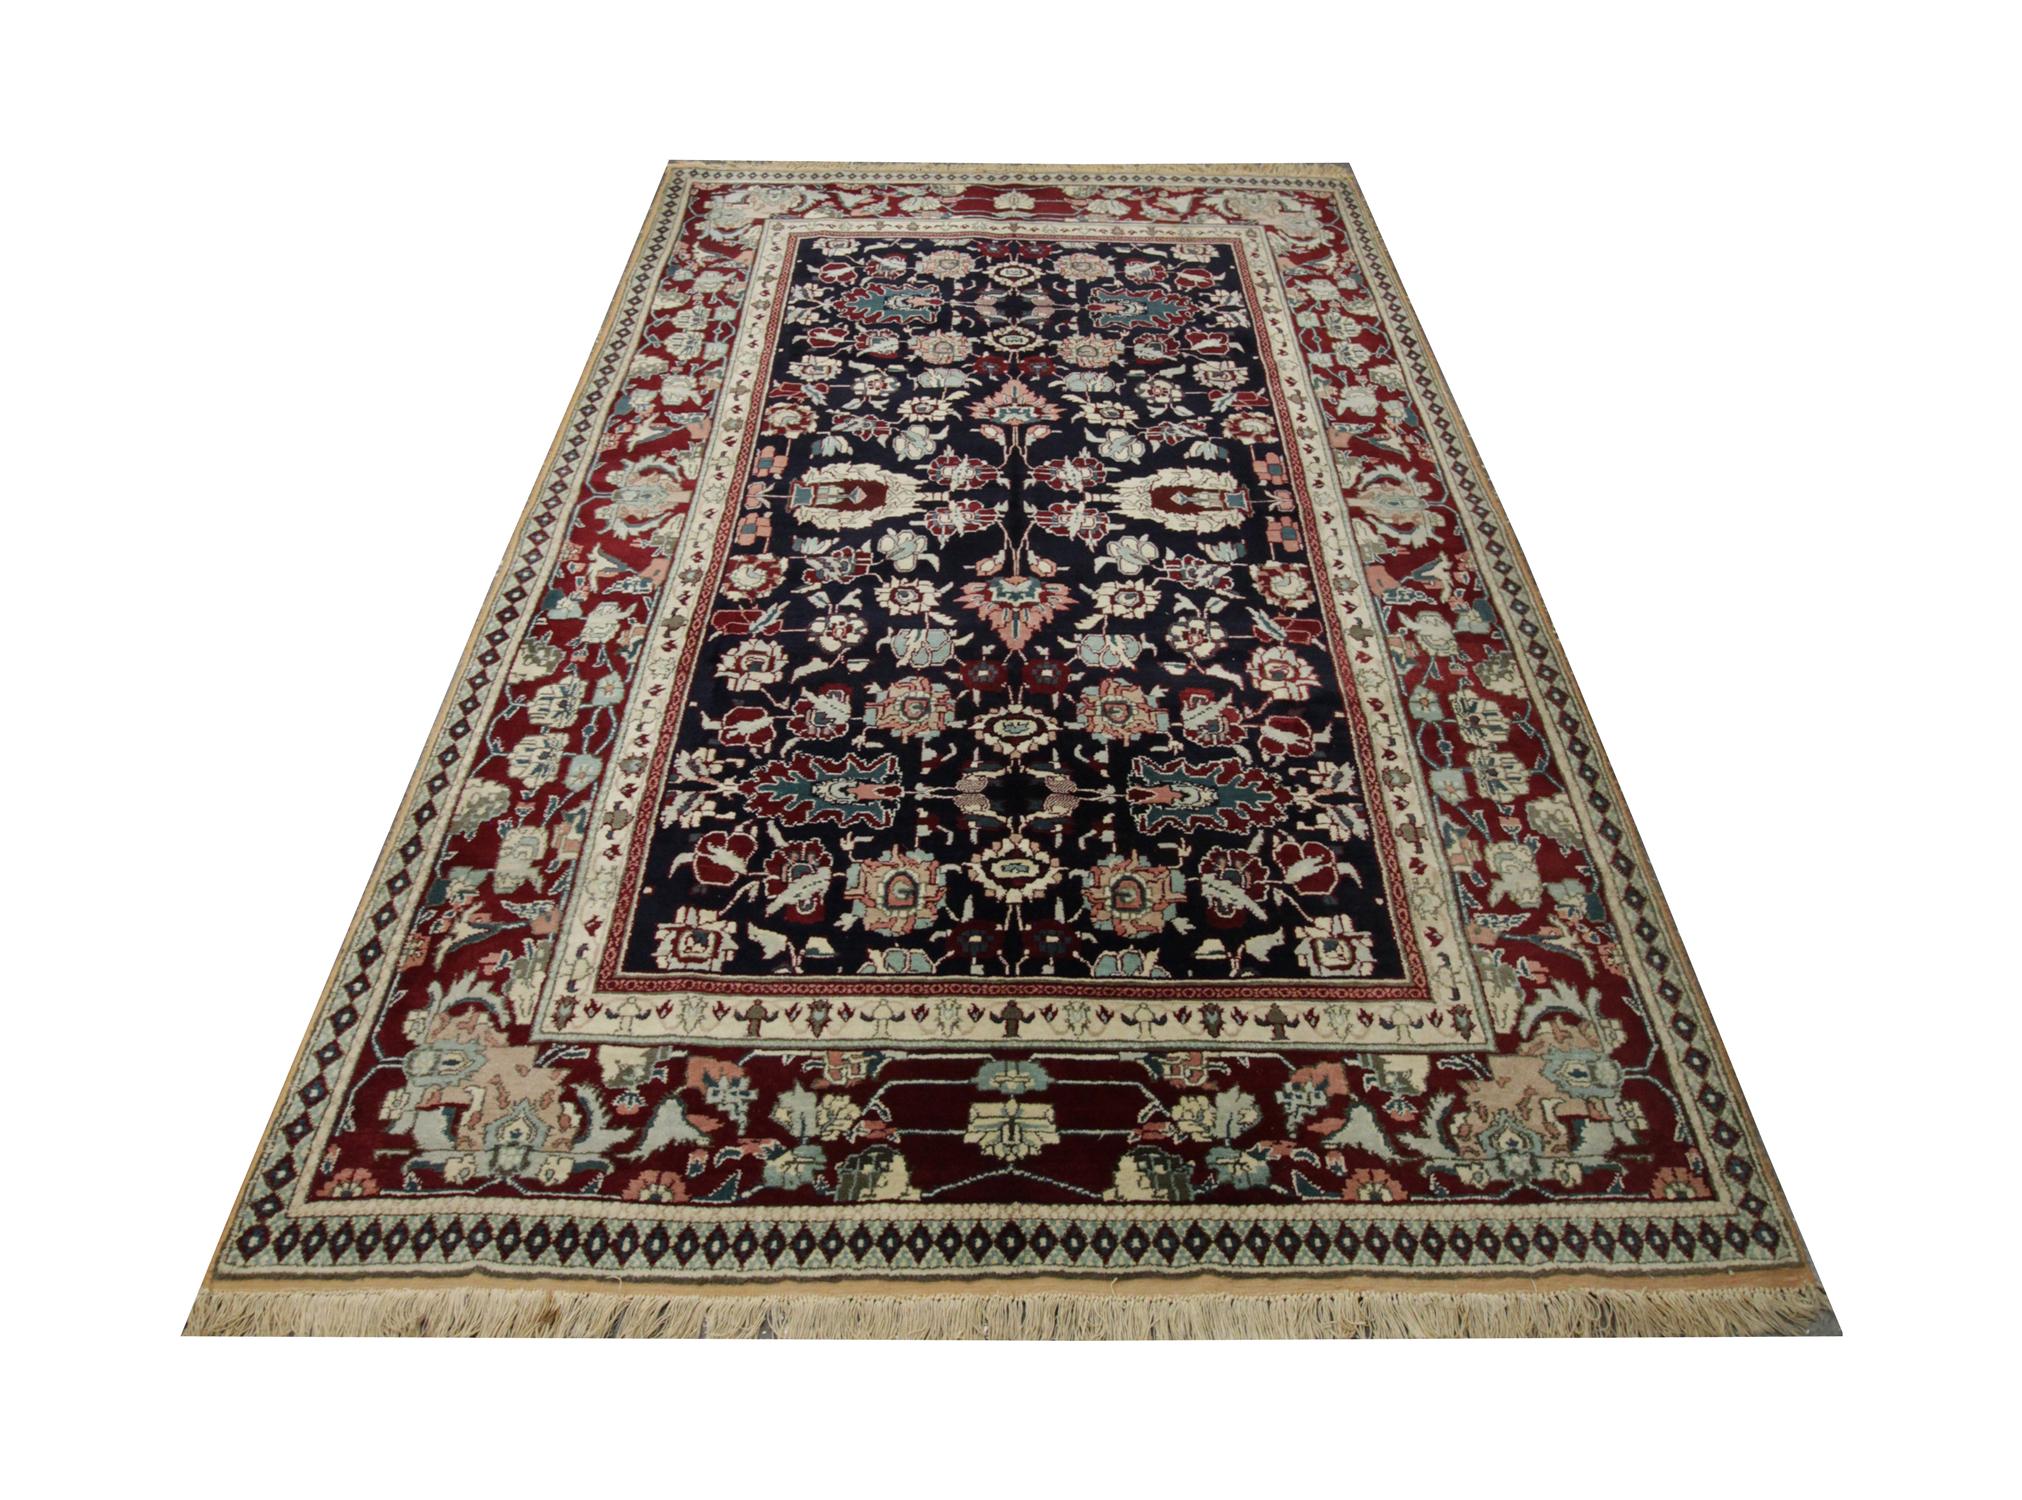 This elegant wool rug was woven by hand in India in the 1900s. Constructed with a fantastic design and colour palette including blue, brown and beige. The tribal patterns have been intricately designed with motifs and medallions symmetrically